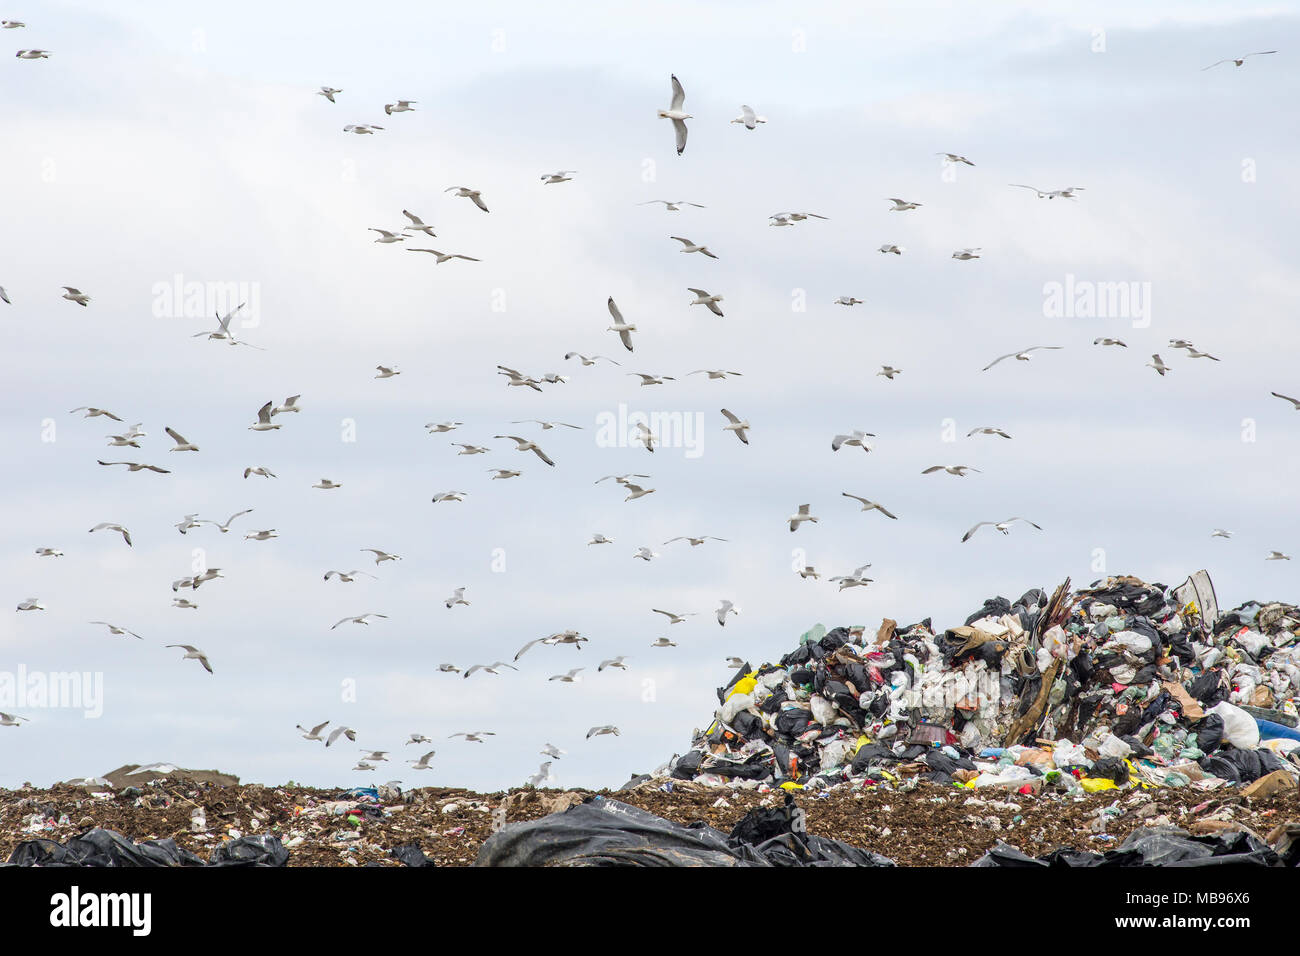 Many gulls flying at a garbage dump Stock Photo